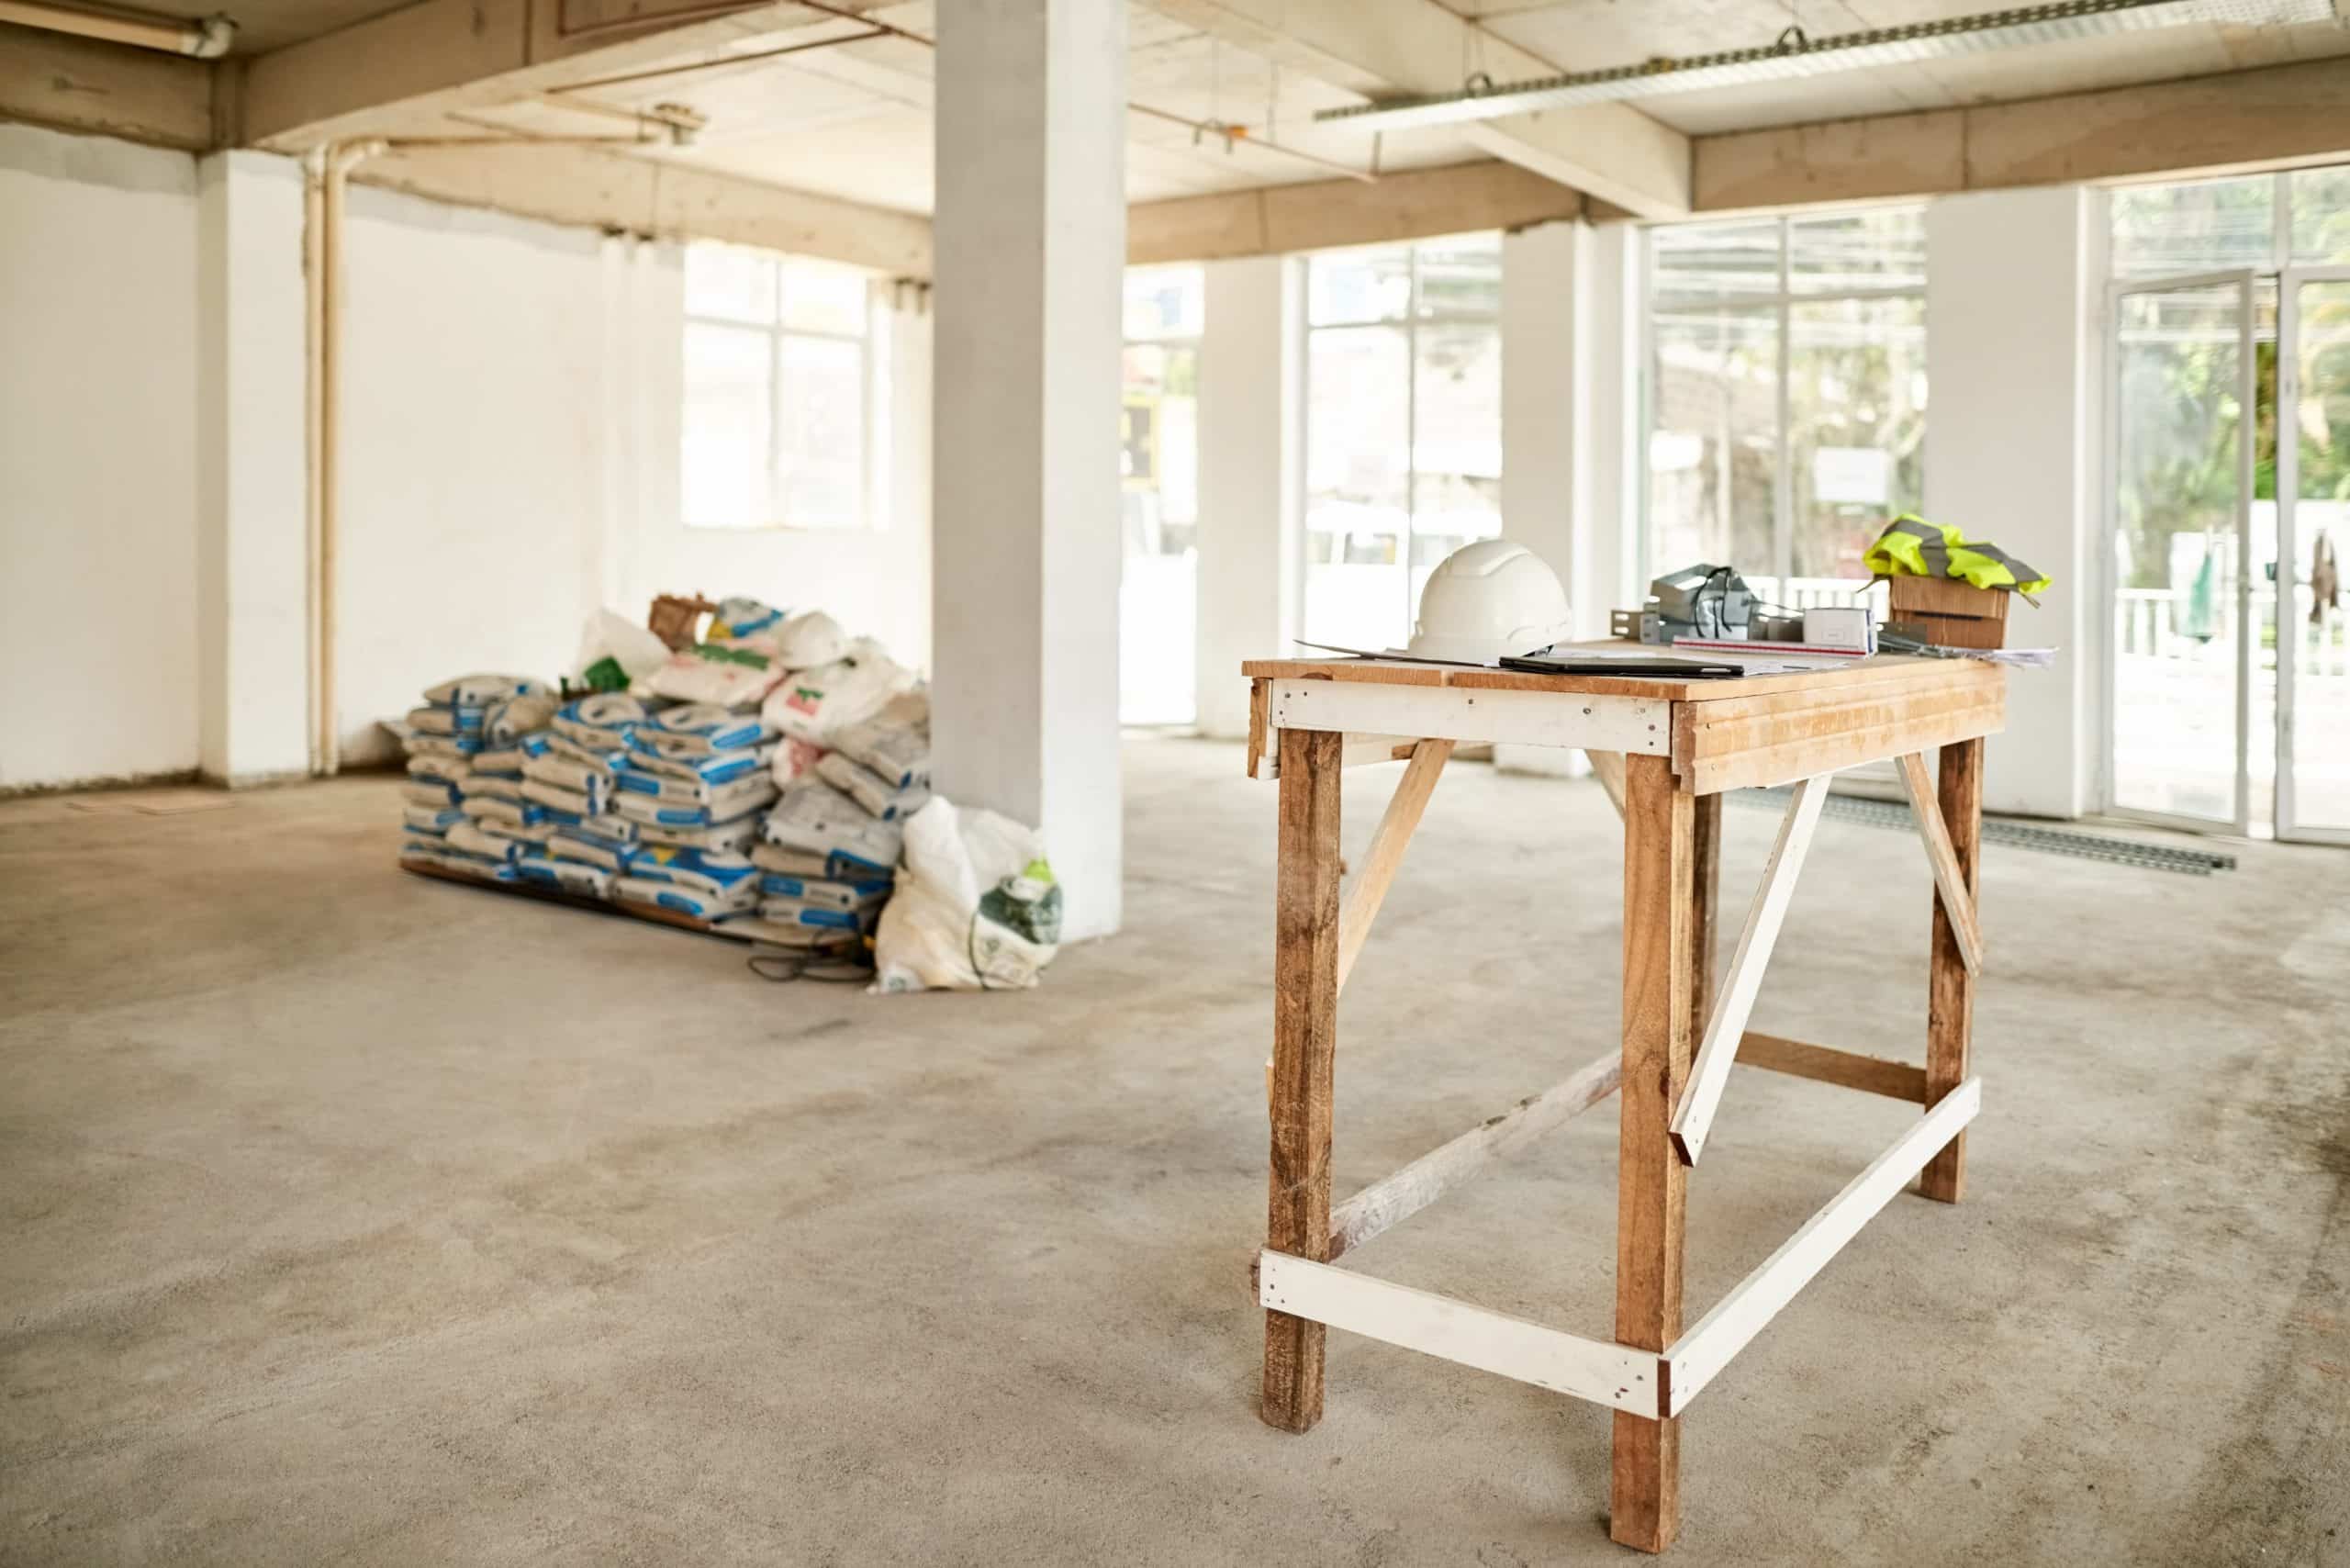 Shot of a new construction site with a workbench and cement bags